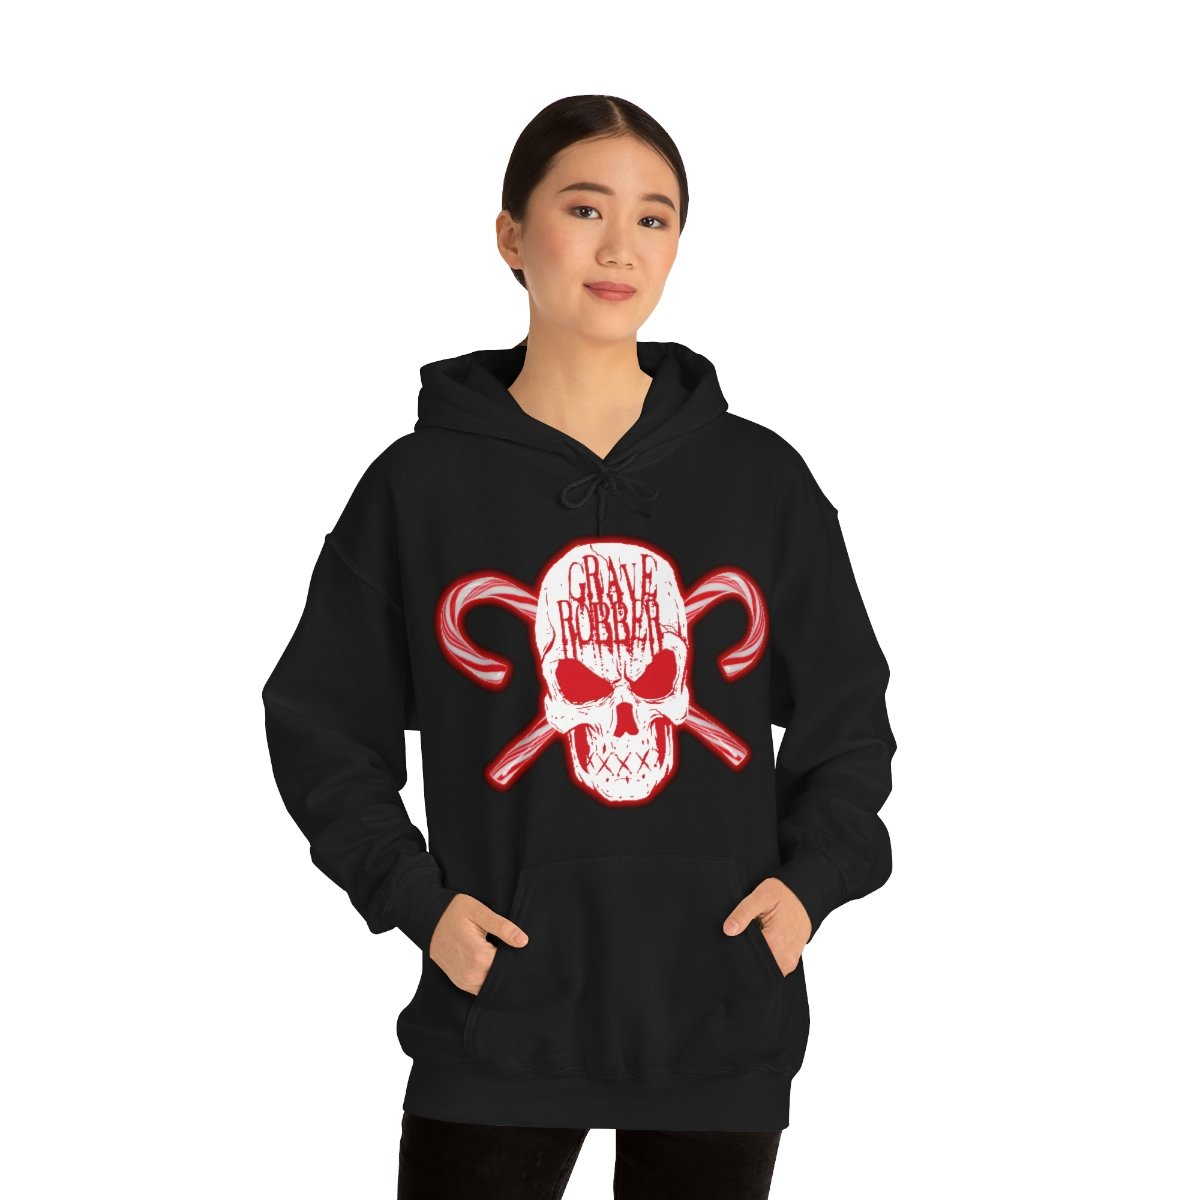 Grave Robber Skull and Crosscanes Pullover Hooded Sweatshirt